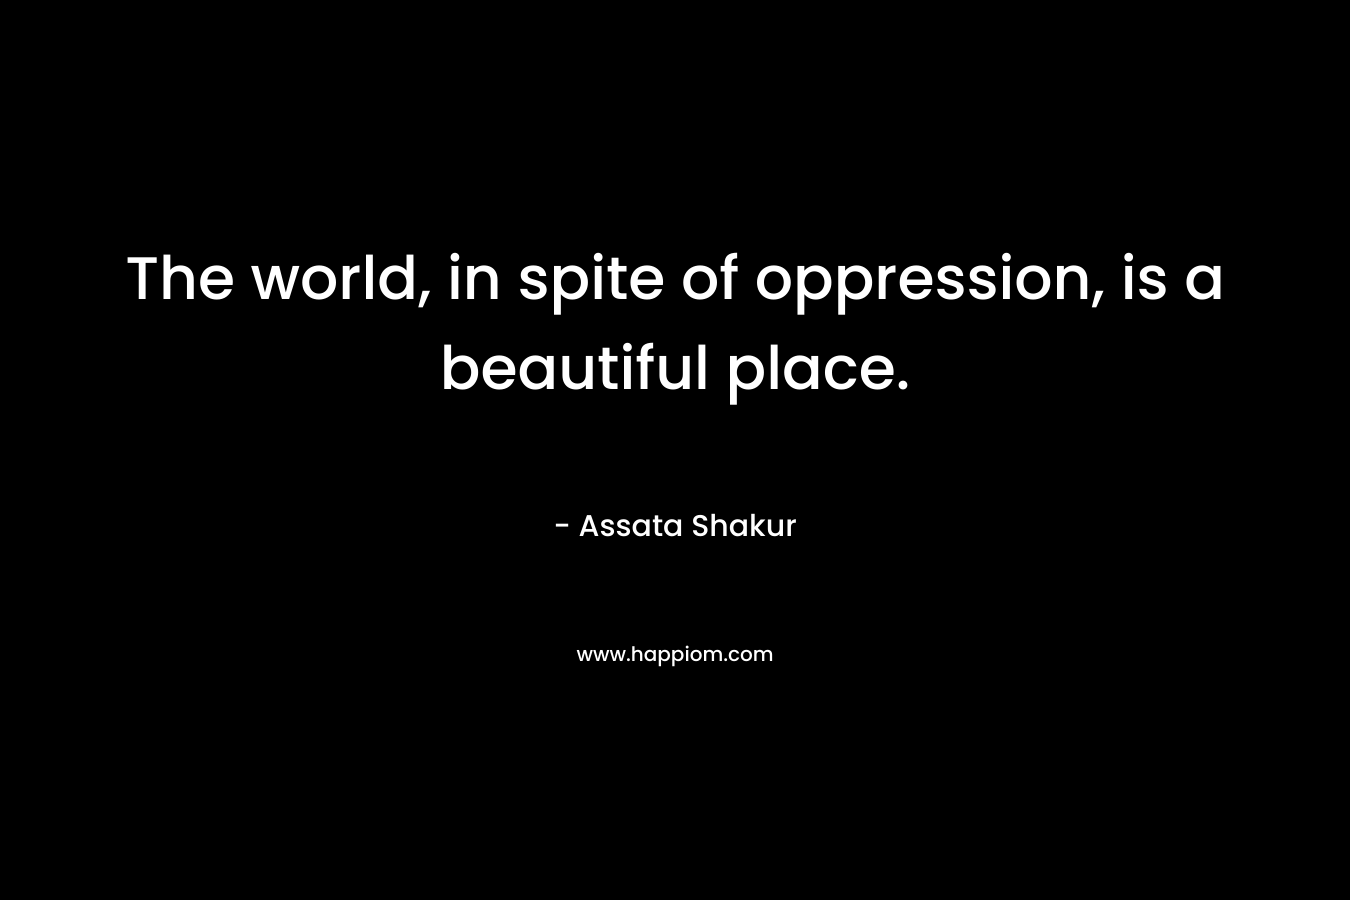 The world, in spite of oppression, is a beautiful place.